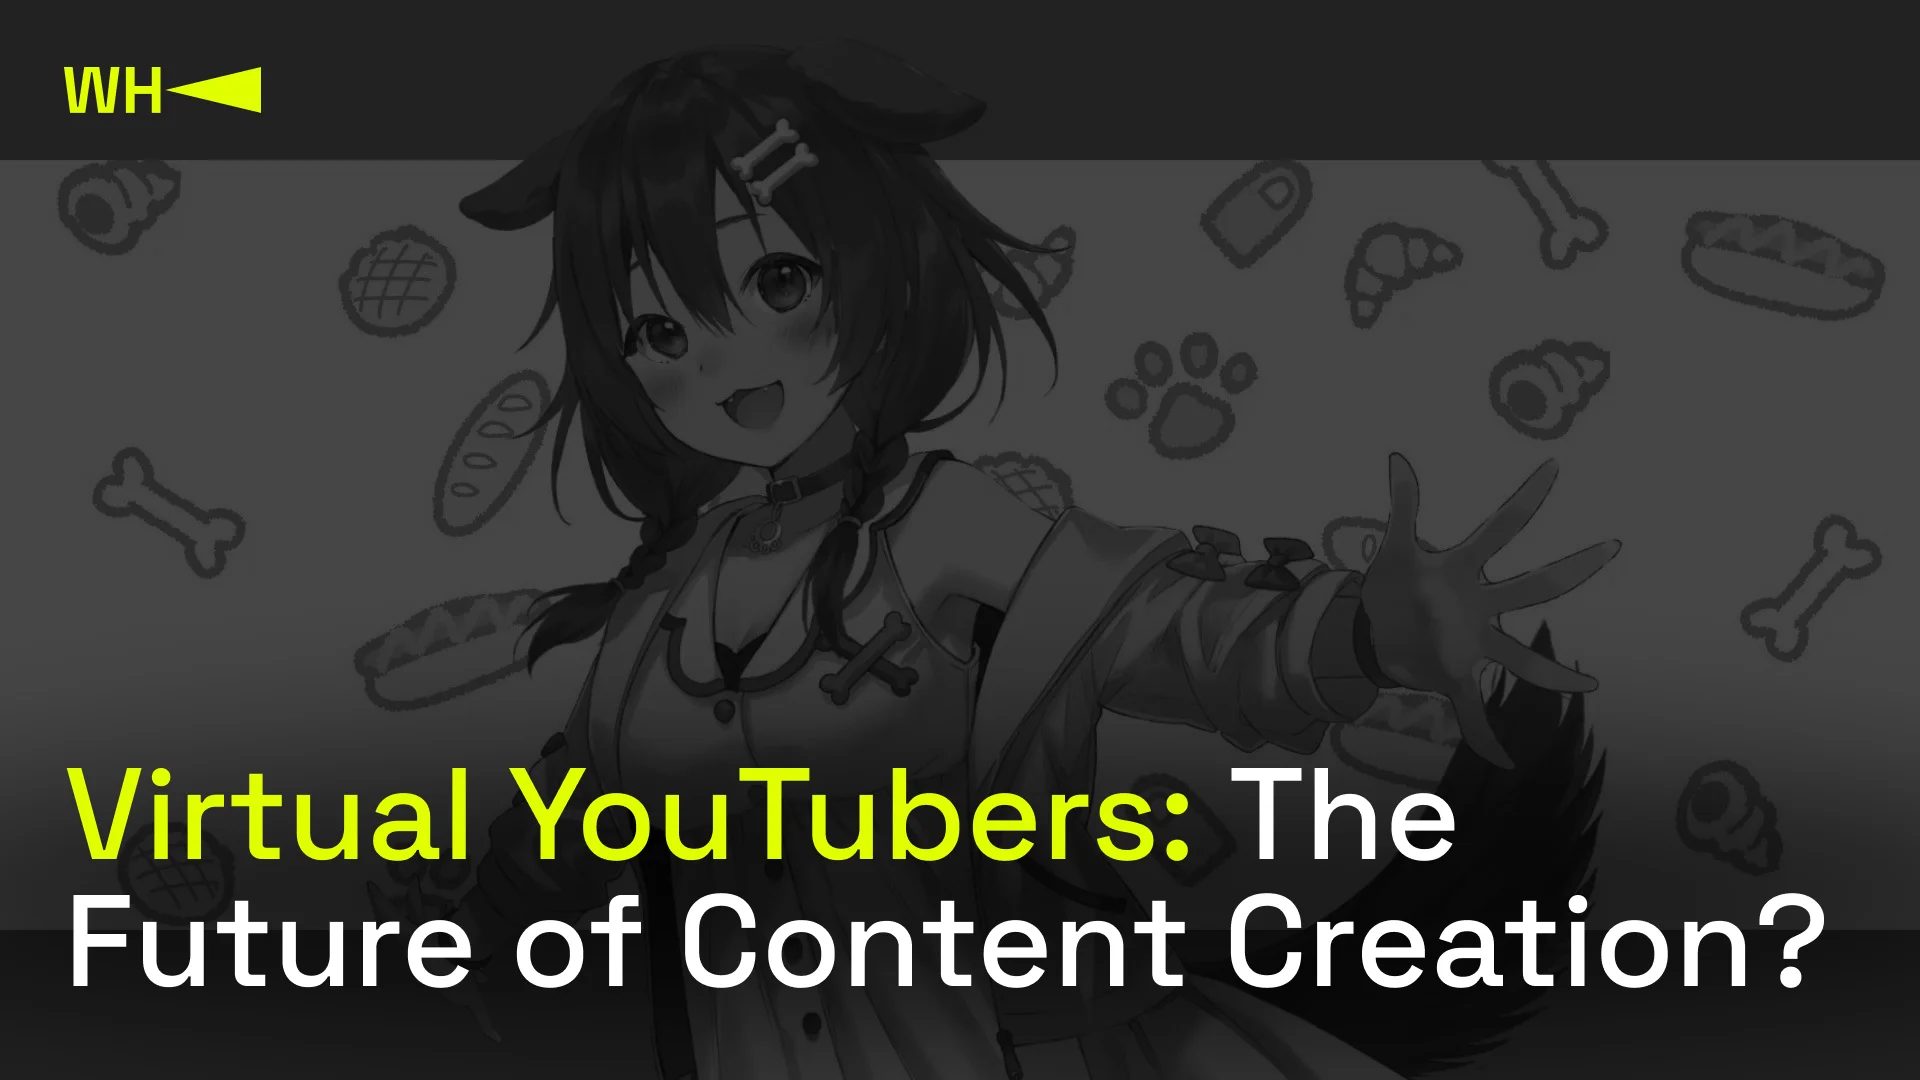 Are virtual YouTubers the future content creators? Credit: WePlay Holding